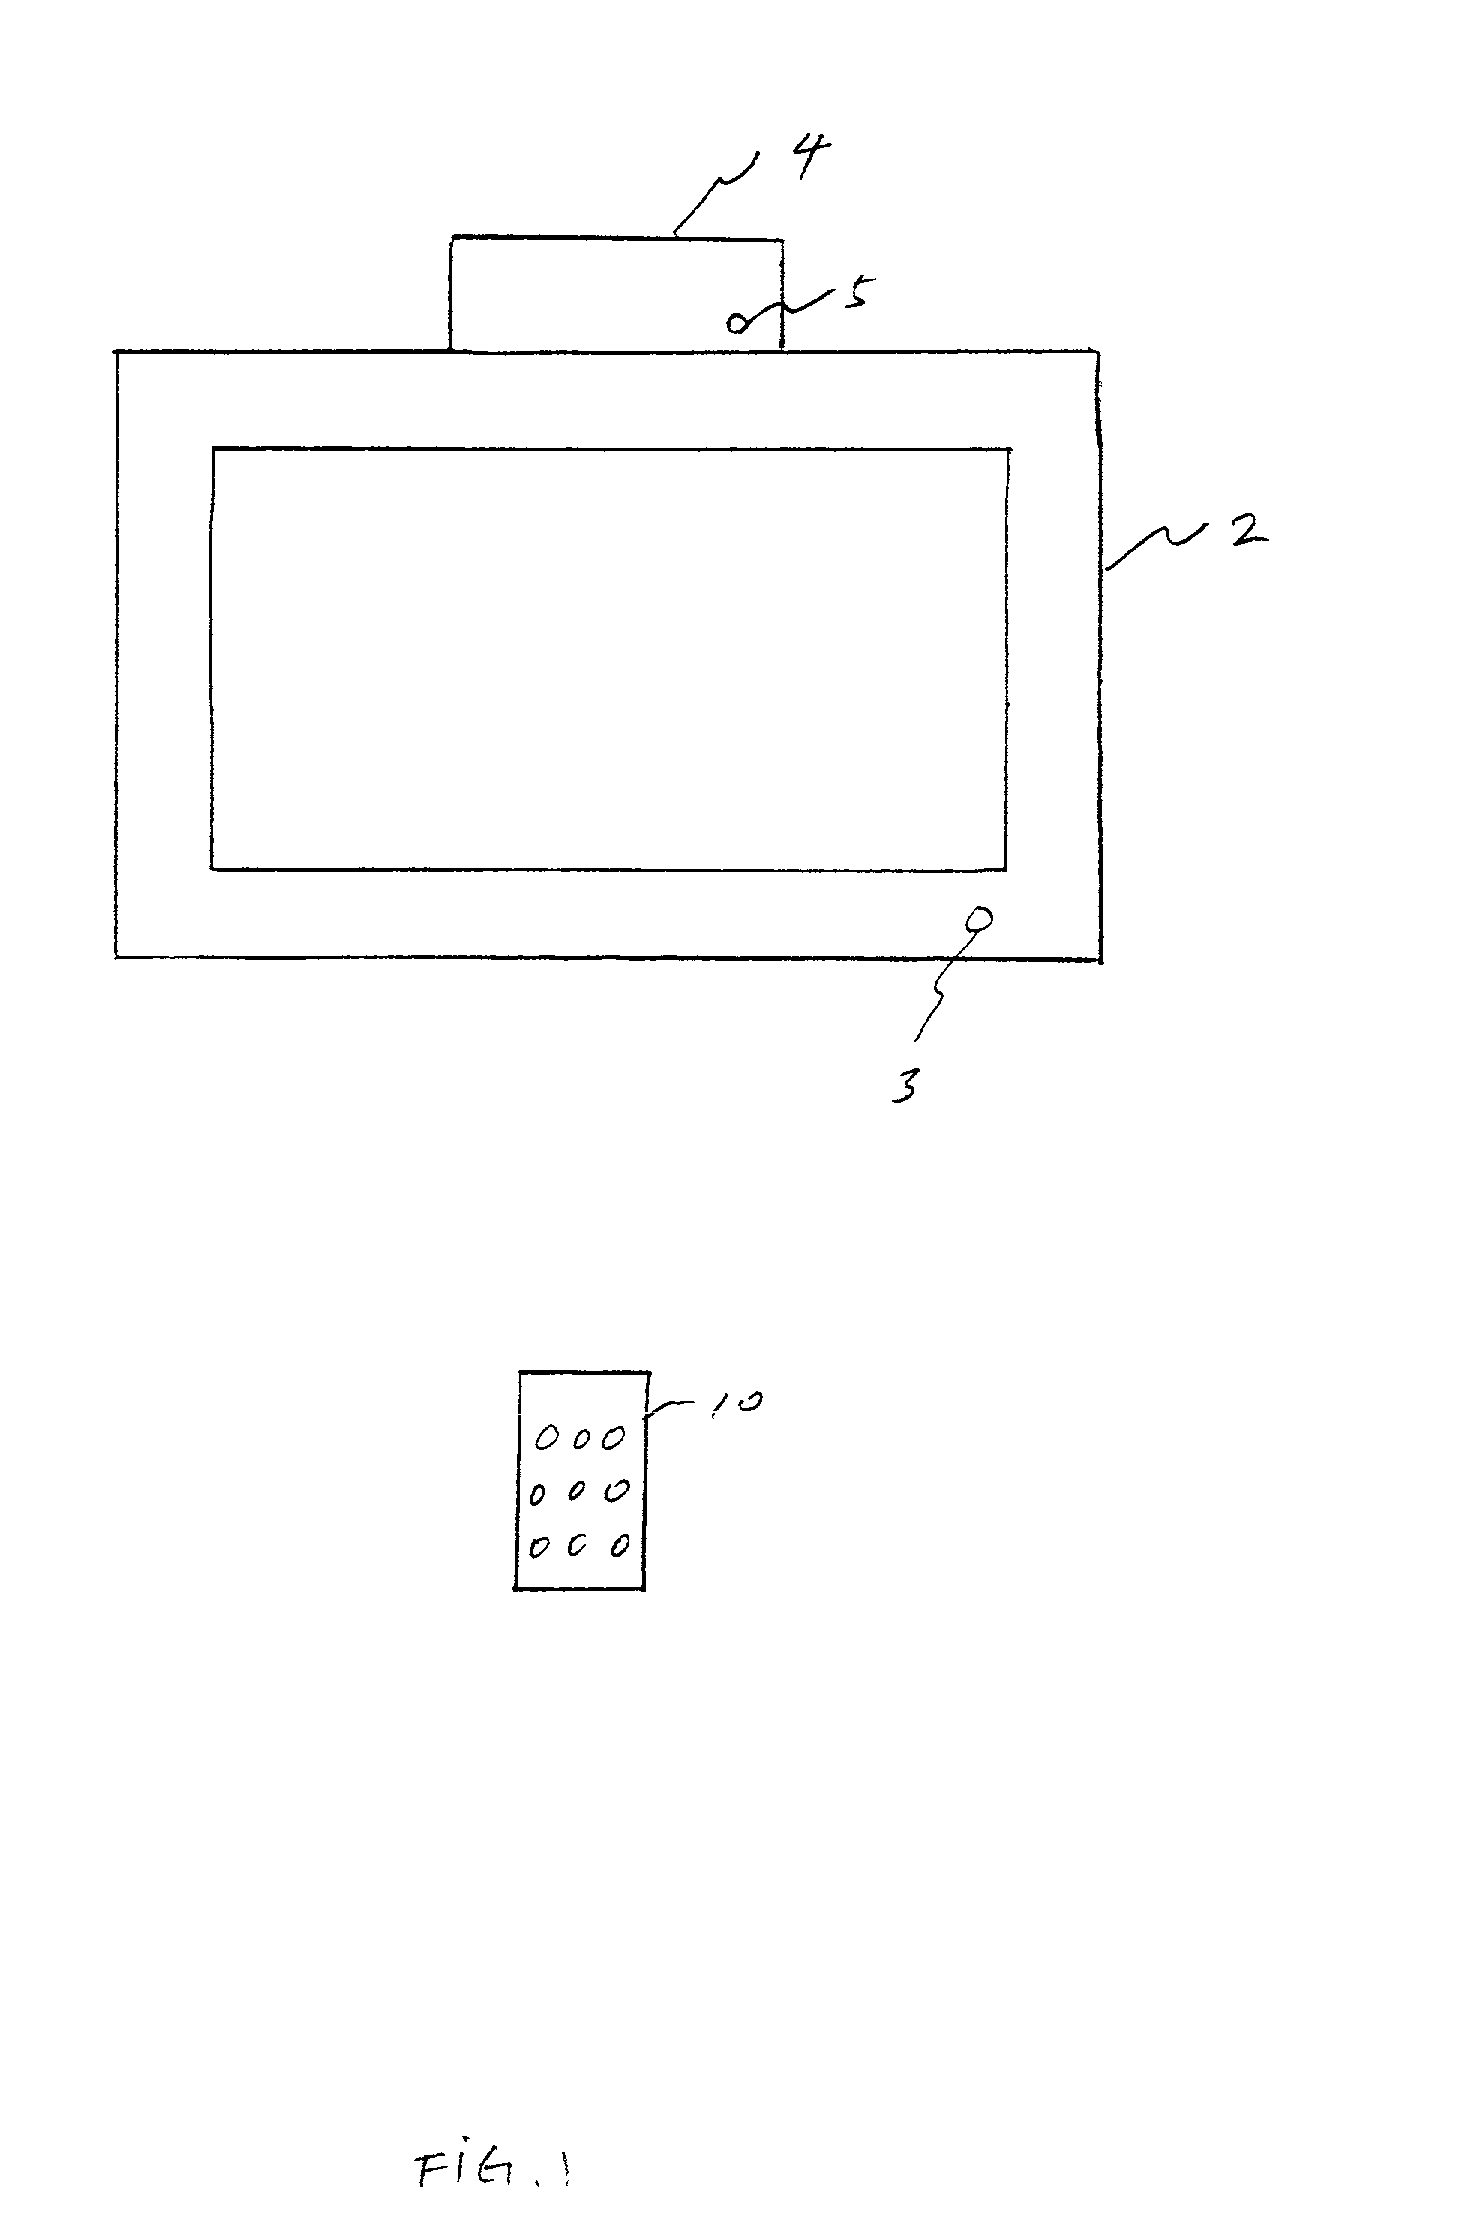 Remote control with the fingerprint recognition capability